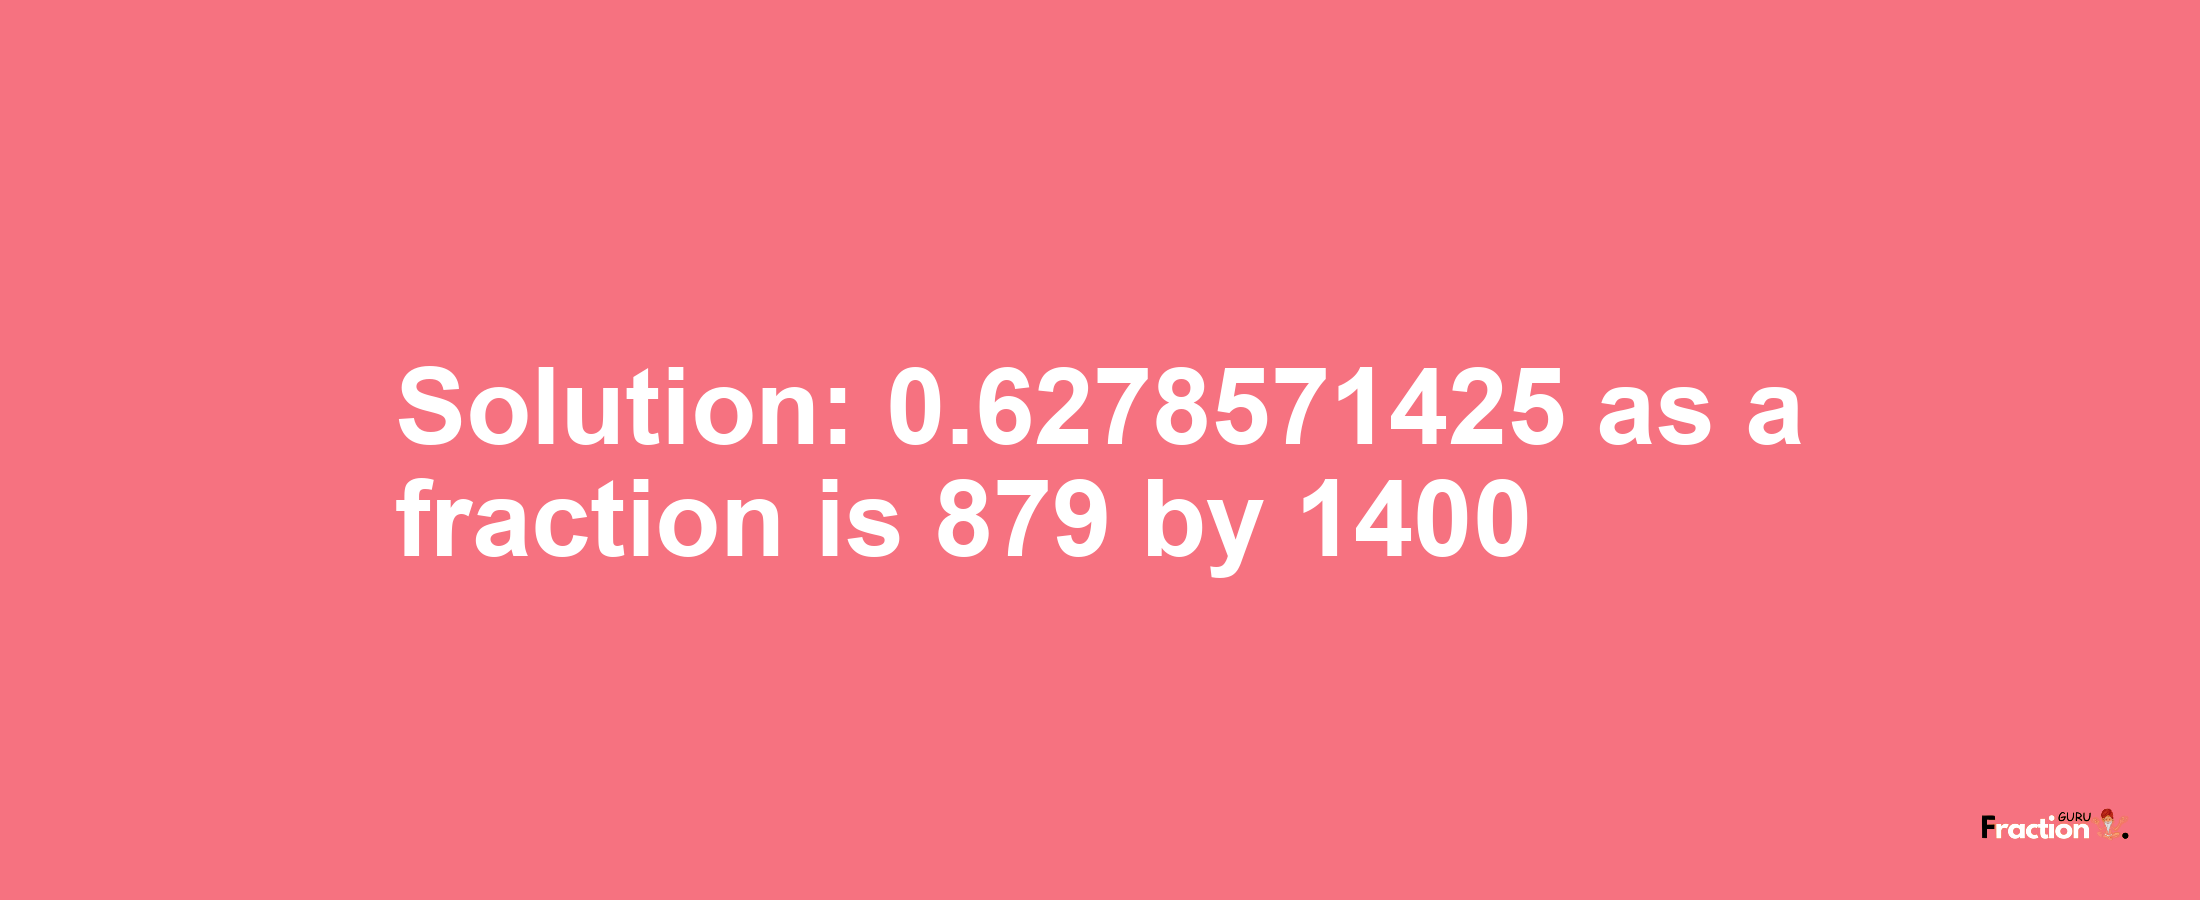 Solution:0.6278571425 as a fraction is 879/1400